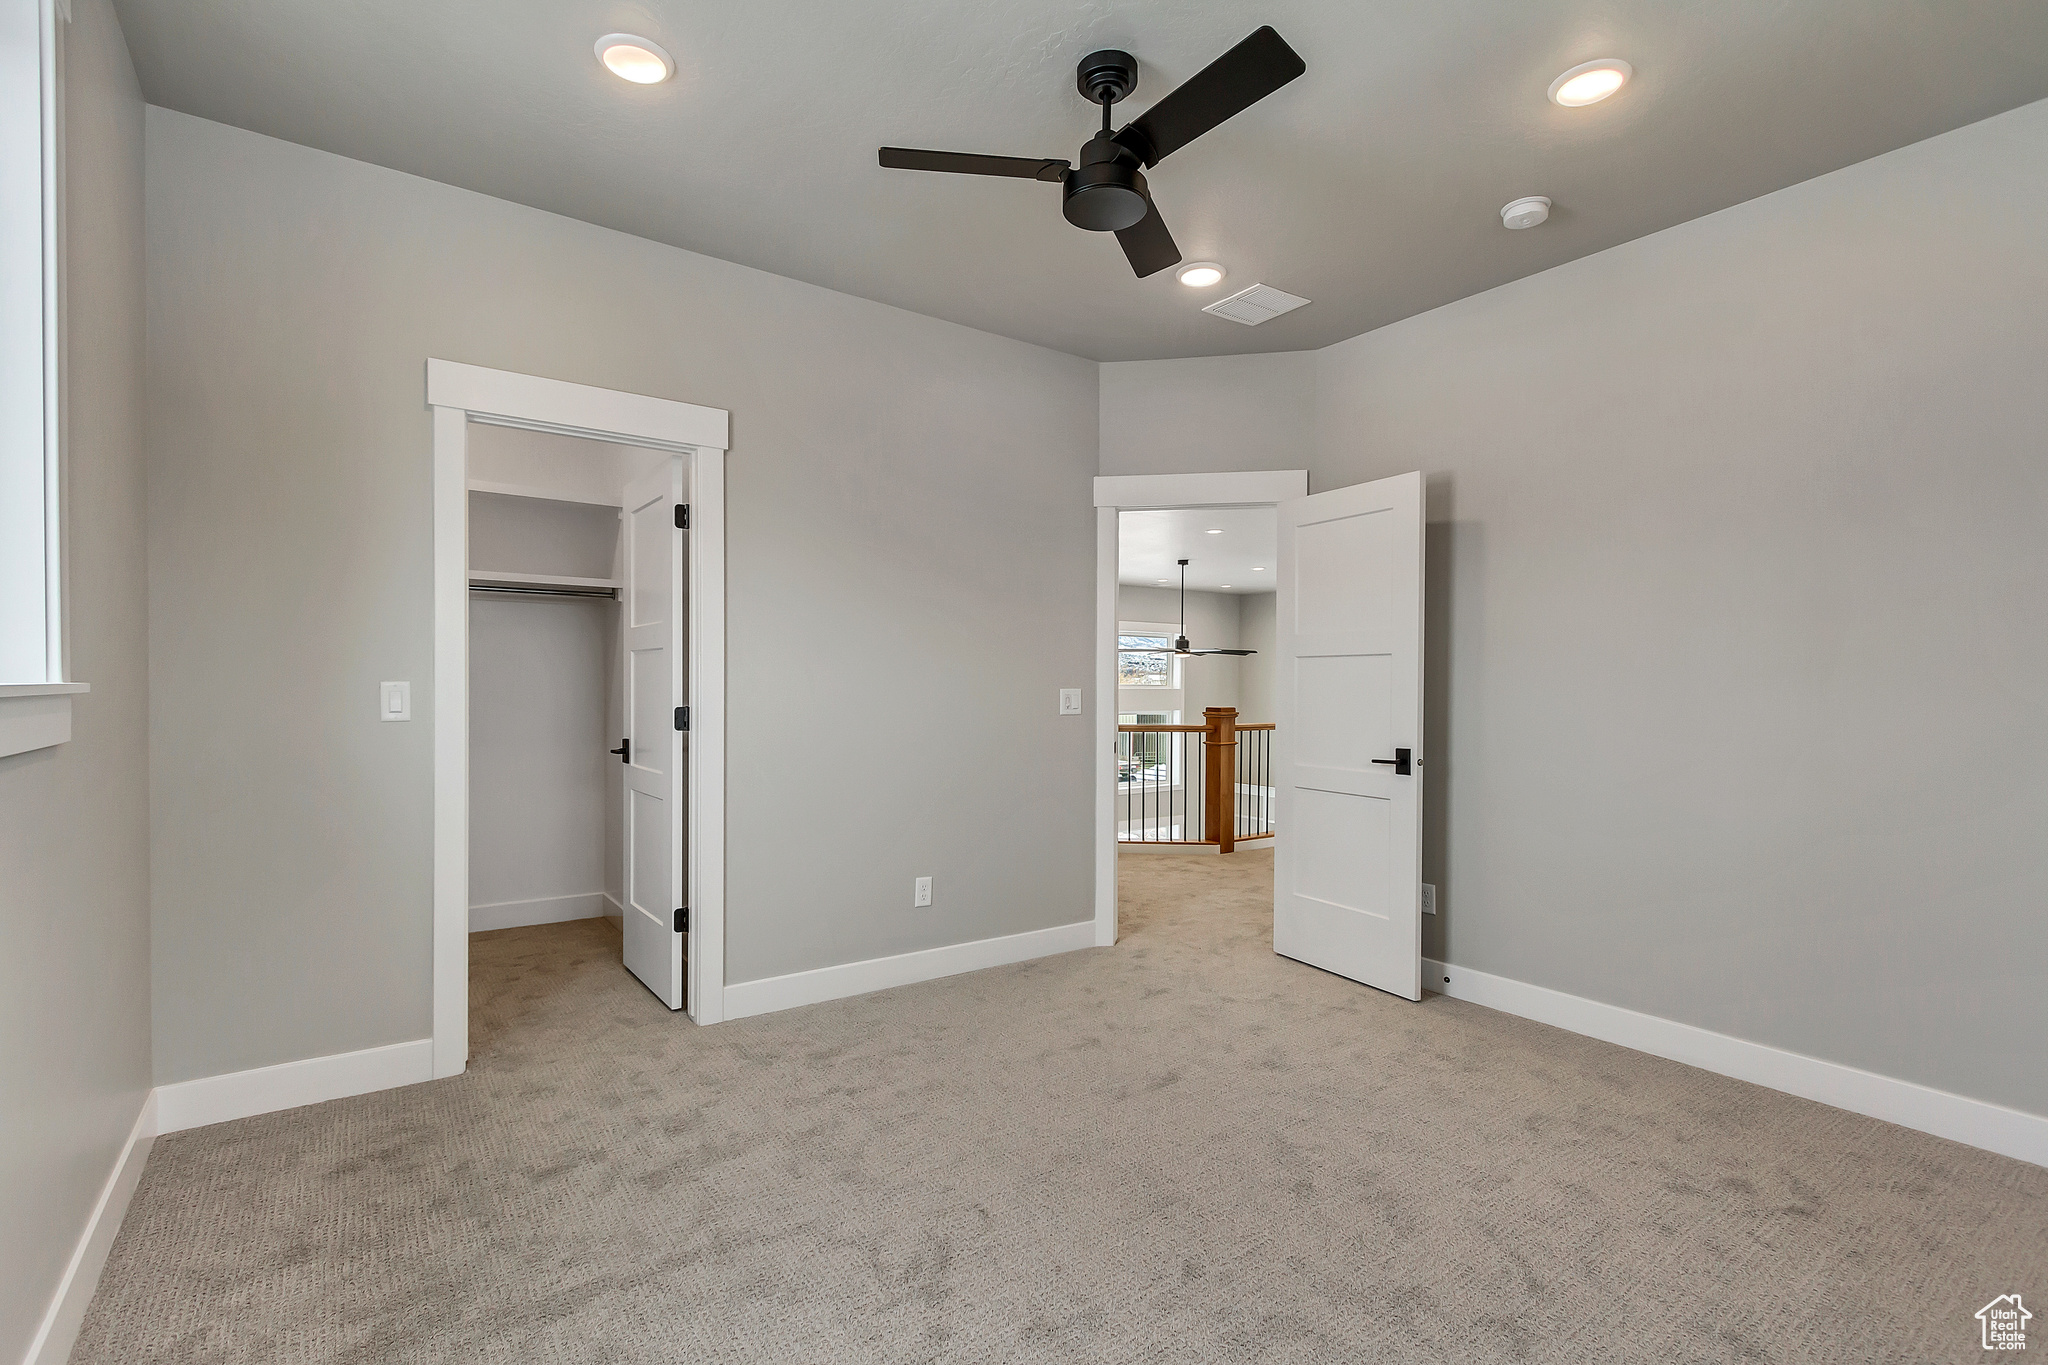 Unfurnished bedroom featuring light carpet, a closet, a spacious closet, and ceiling fan